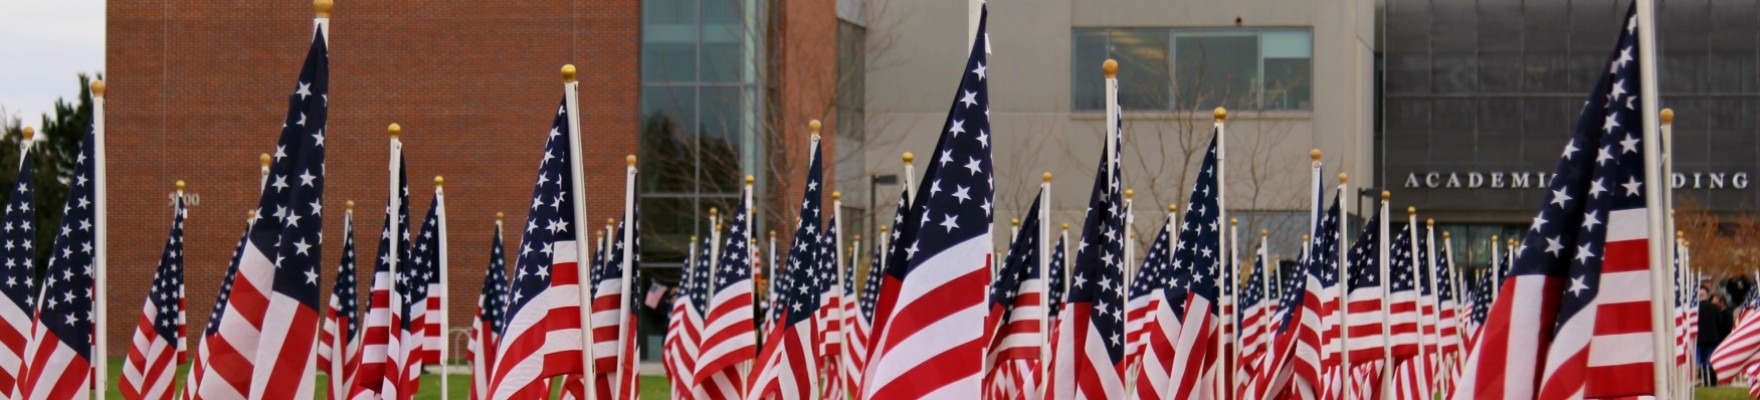 Veteran's Day flag display in front of the CWI Nampa Campus Academic Building.